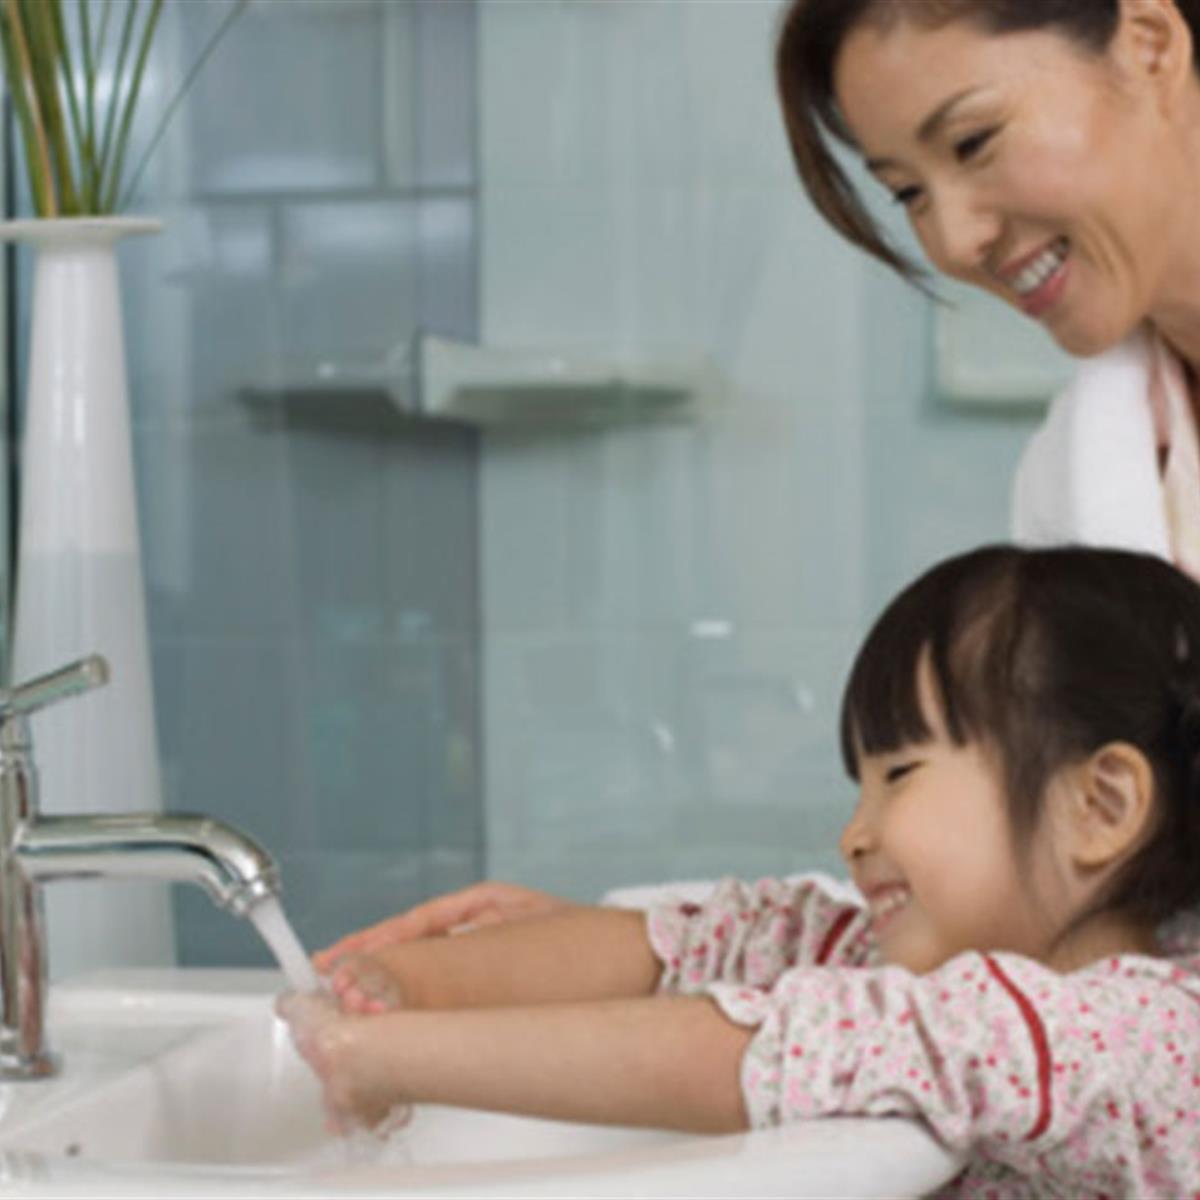 Handwashing for parents and children